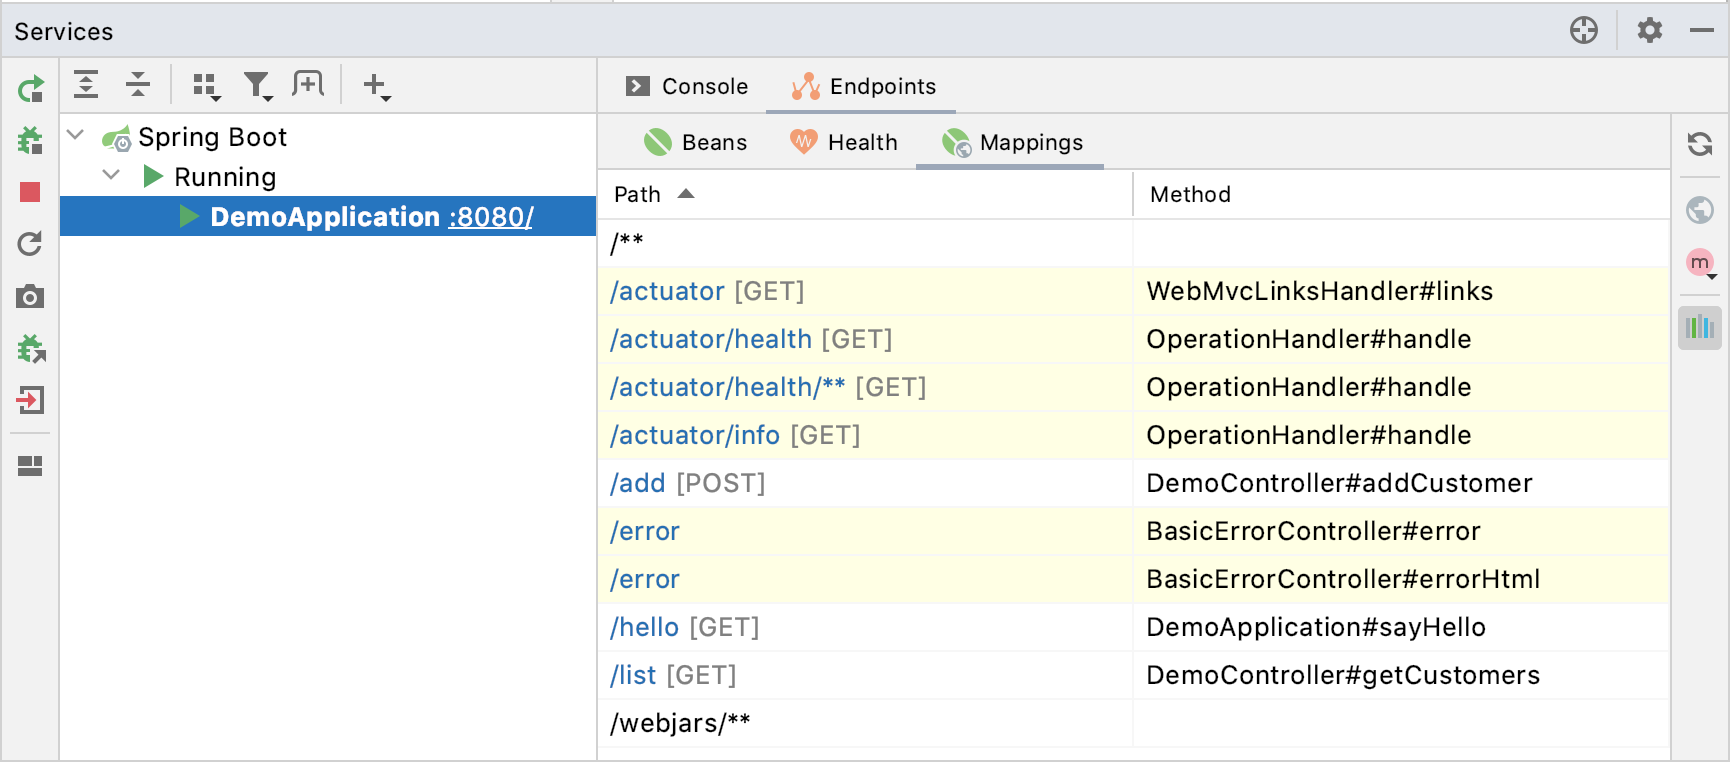 Spring Boot Mappings endpoints tab